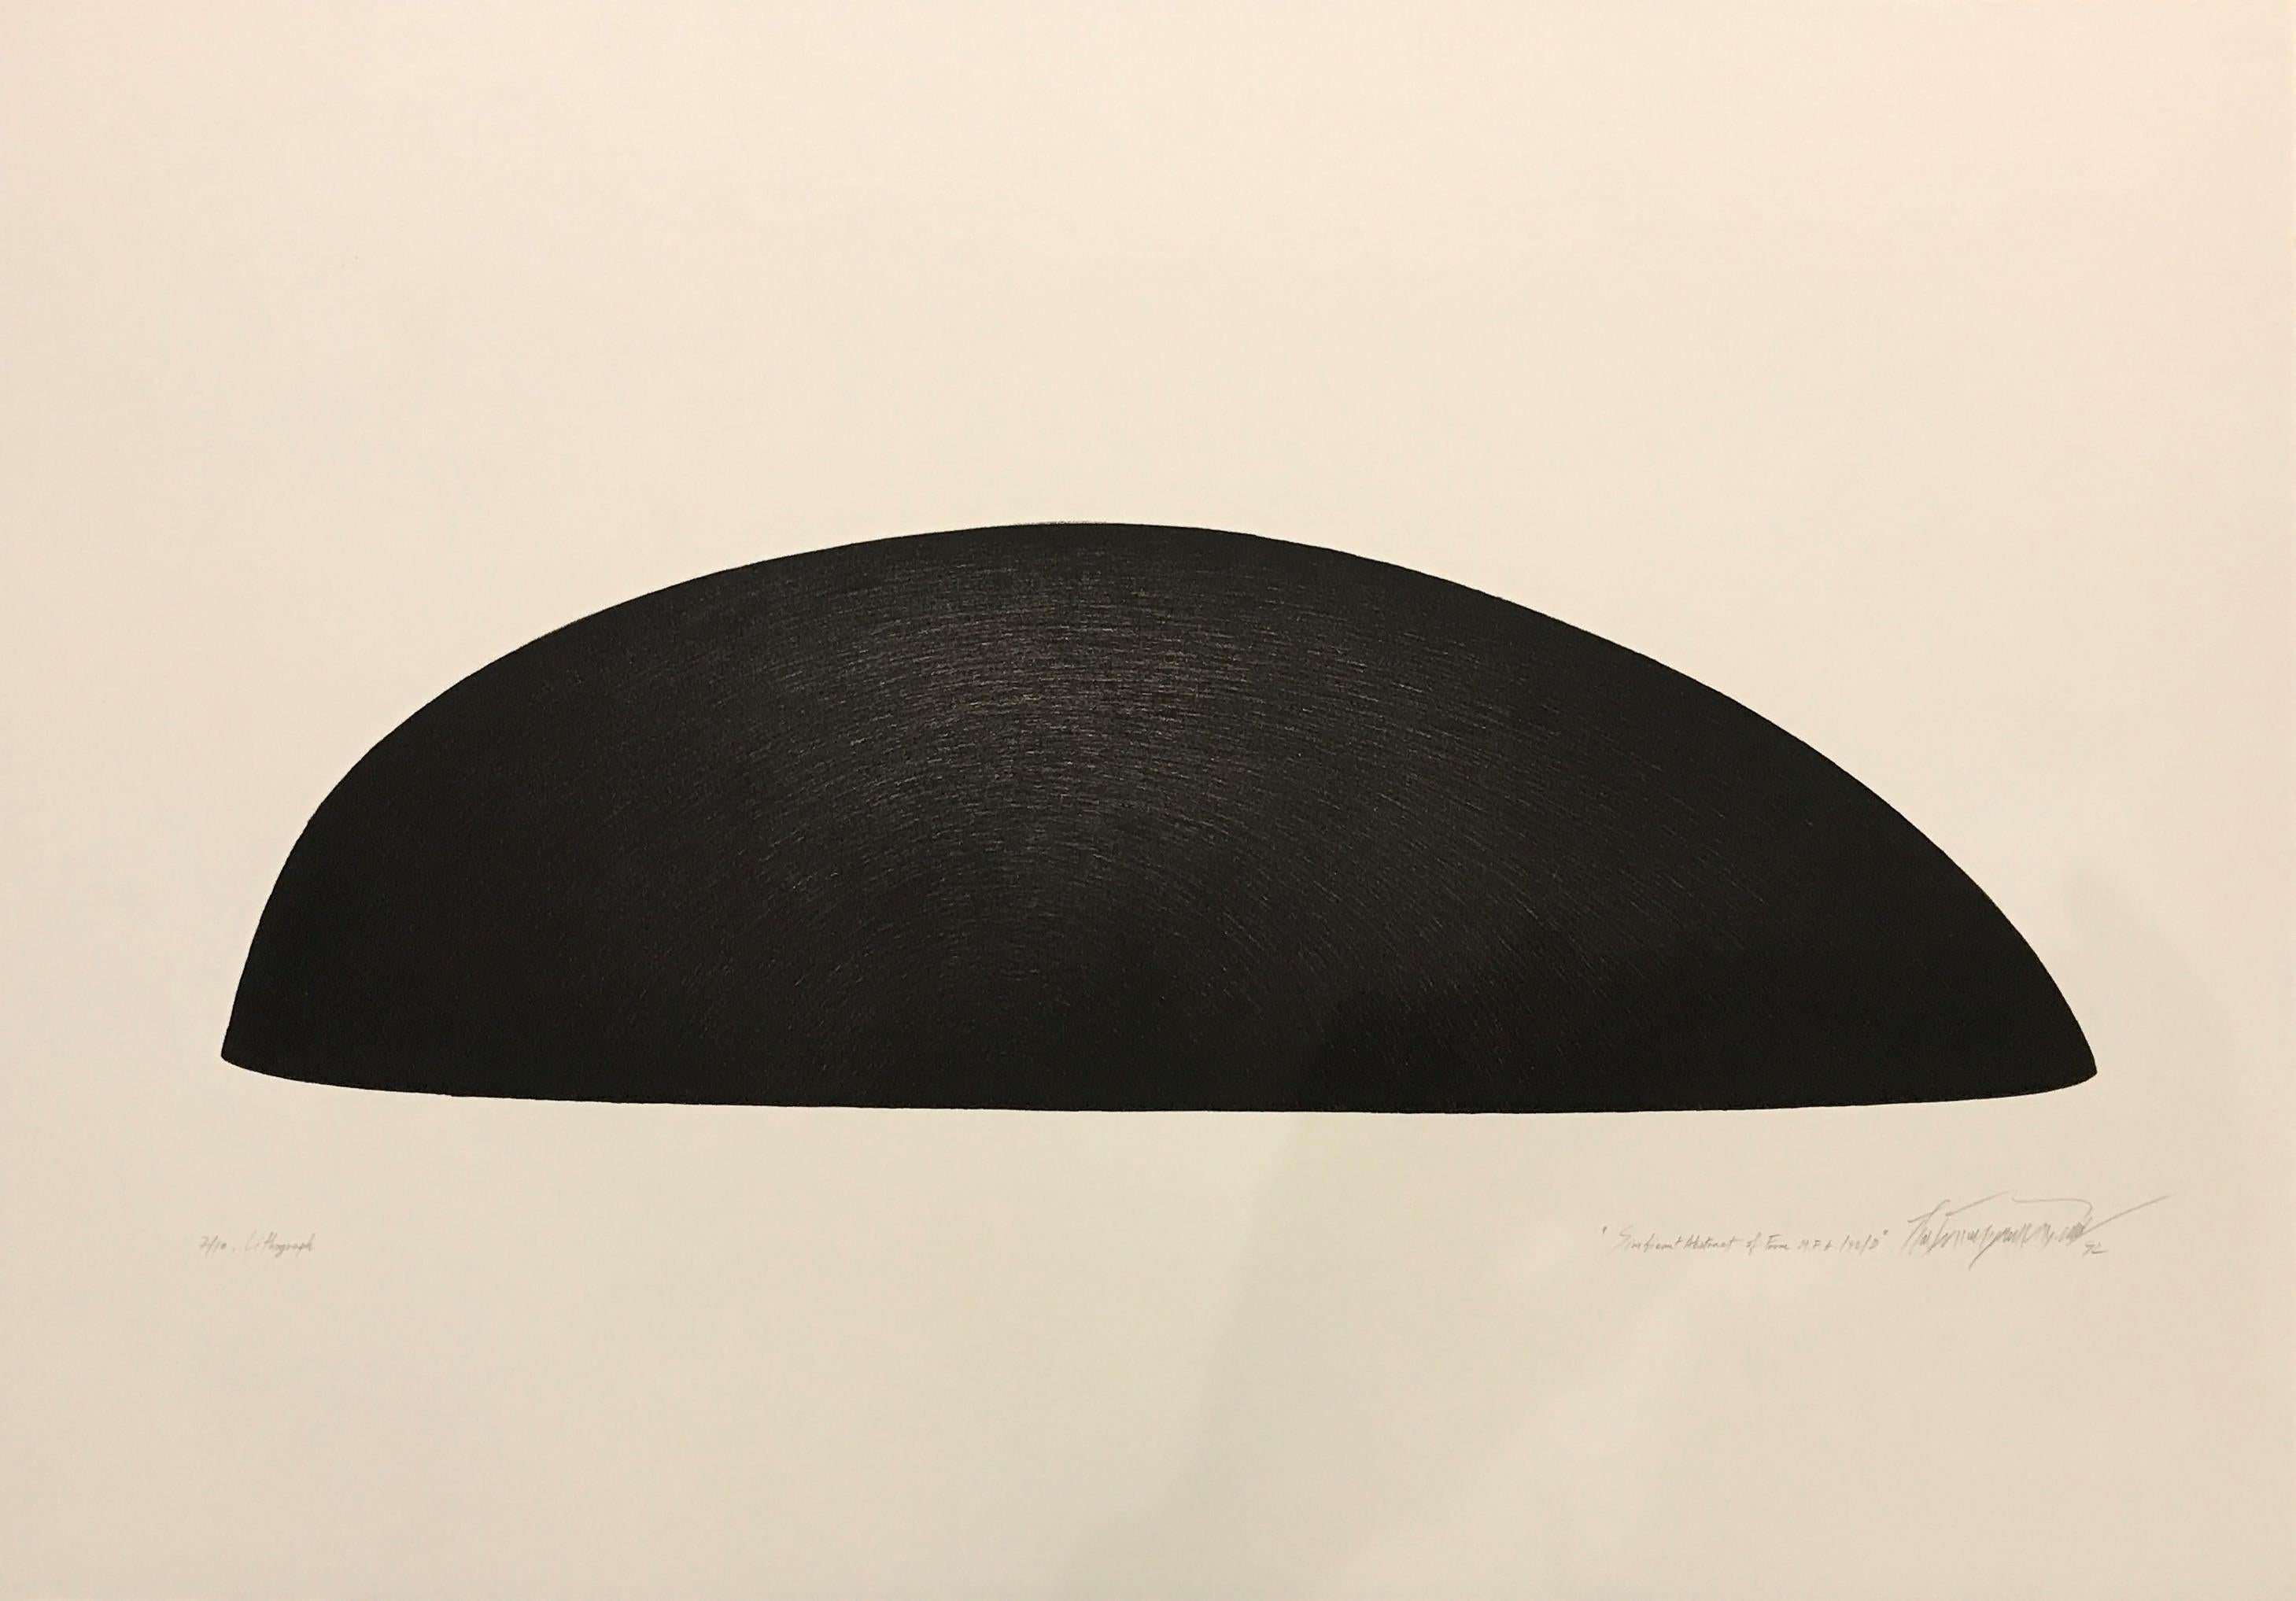 Phatyos Buddhacharoen Abstract Print - "Significant Abstract of Form M.F.A, /92/D" - Minimalist Print